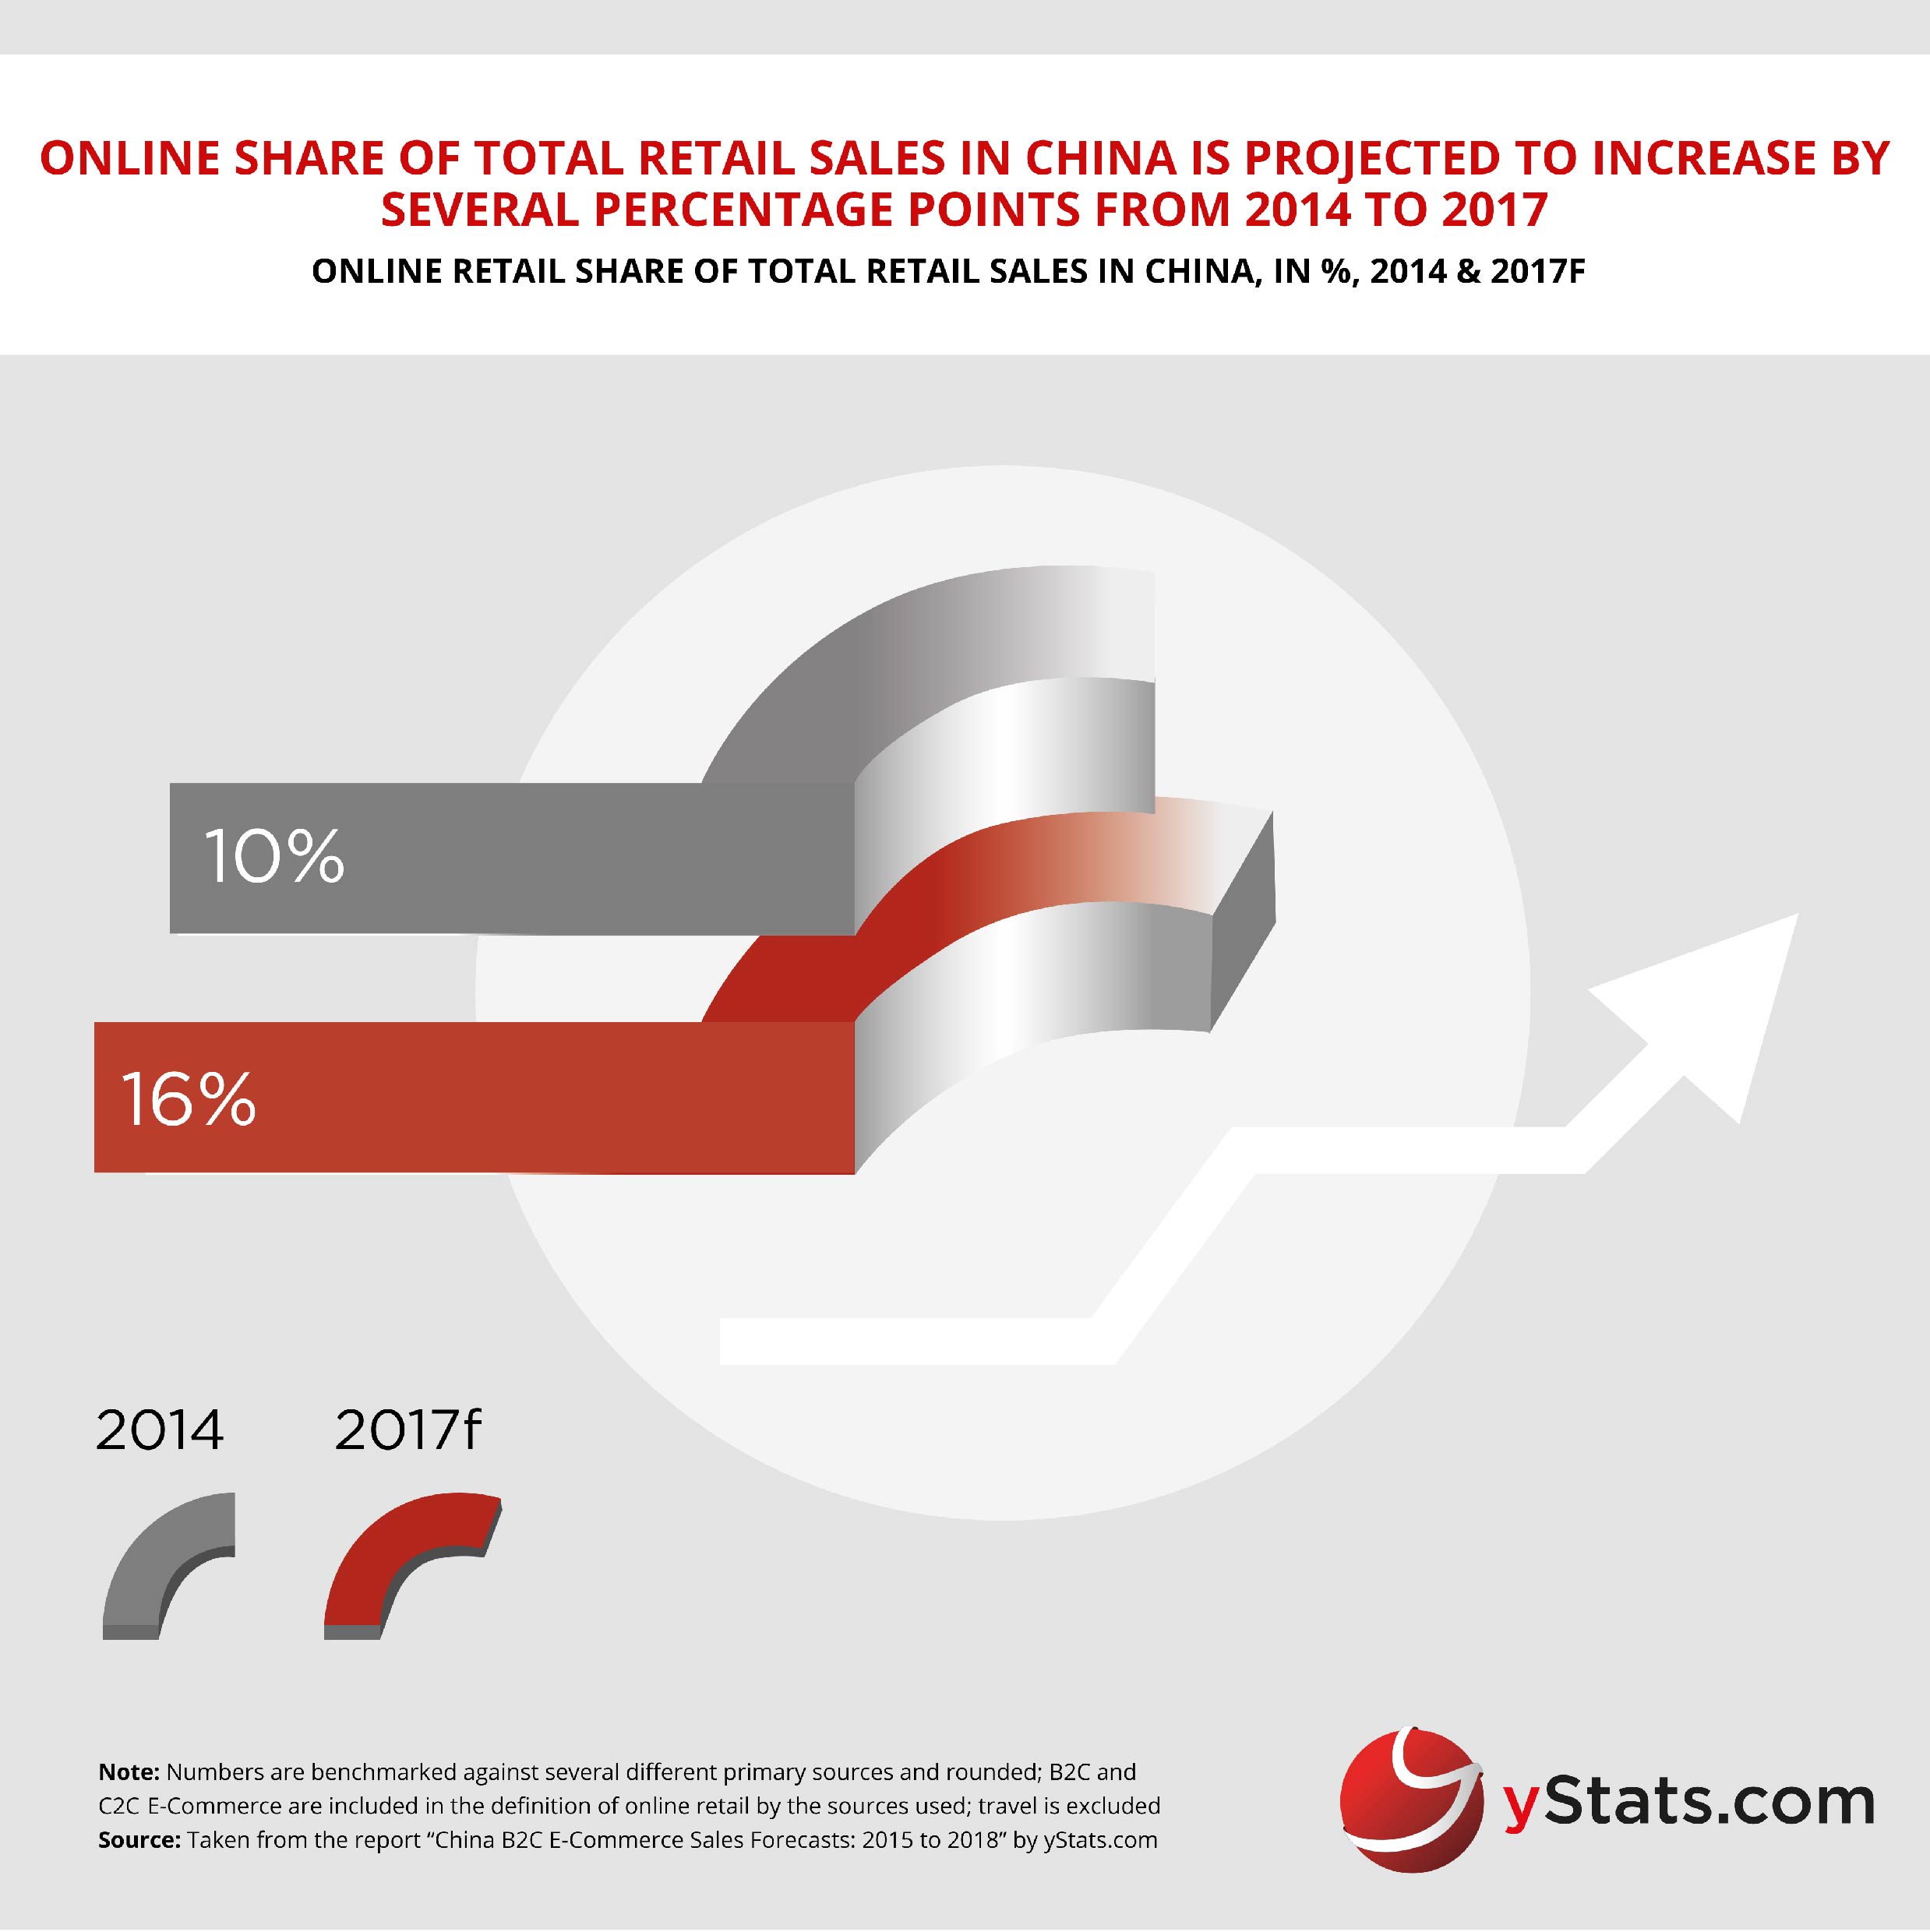 yStats.com Infographic China B2C E-Commerce Sales Forecasts 2015 to 2018